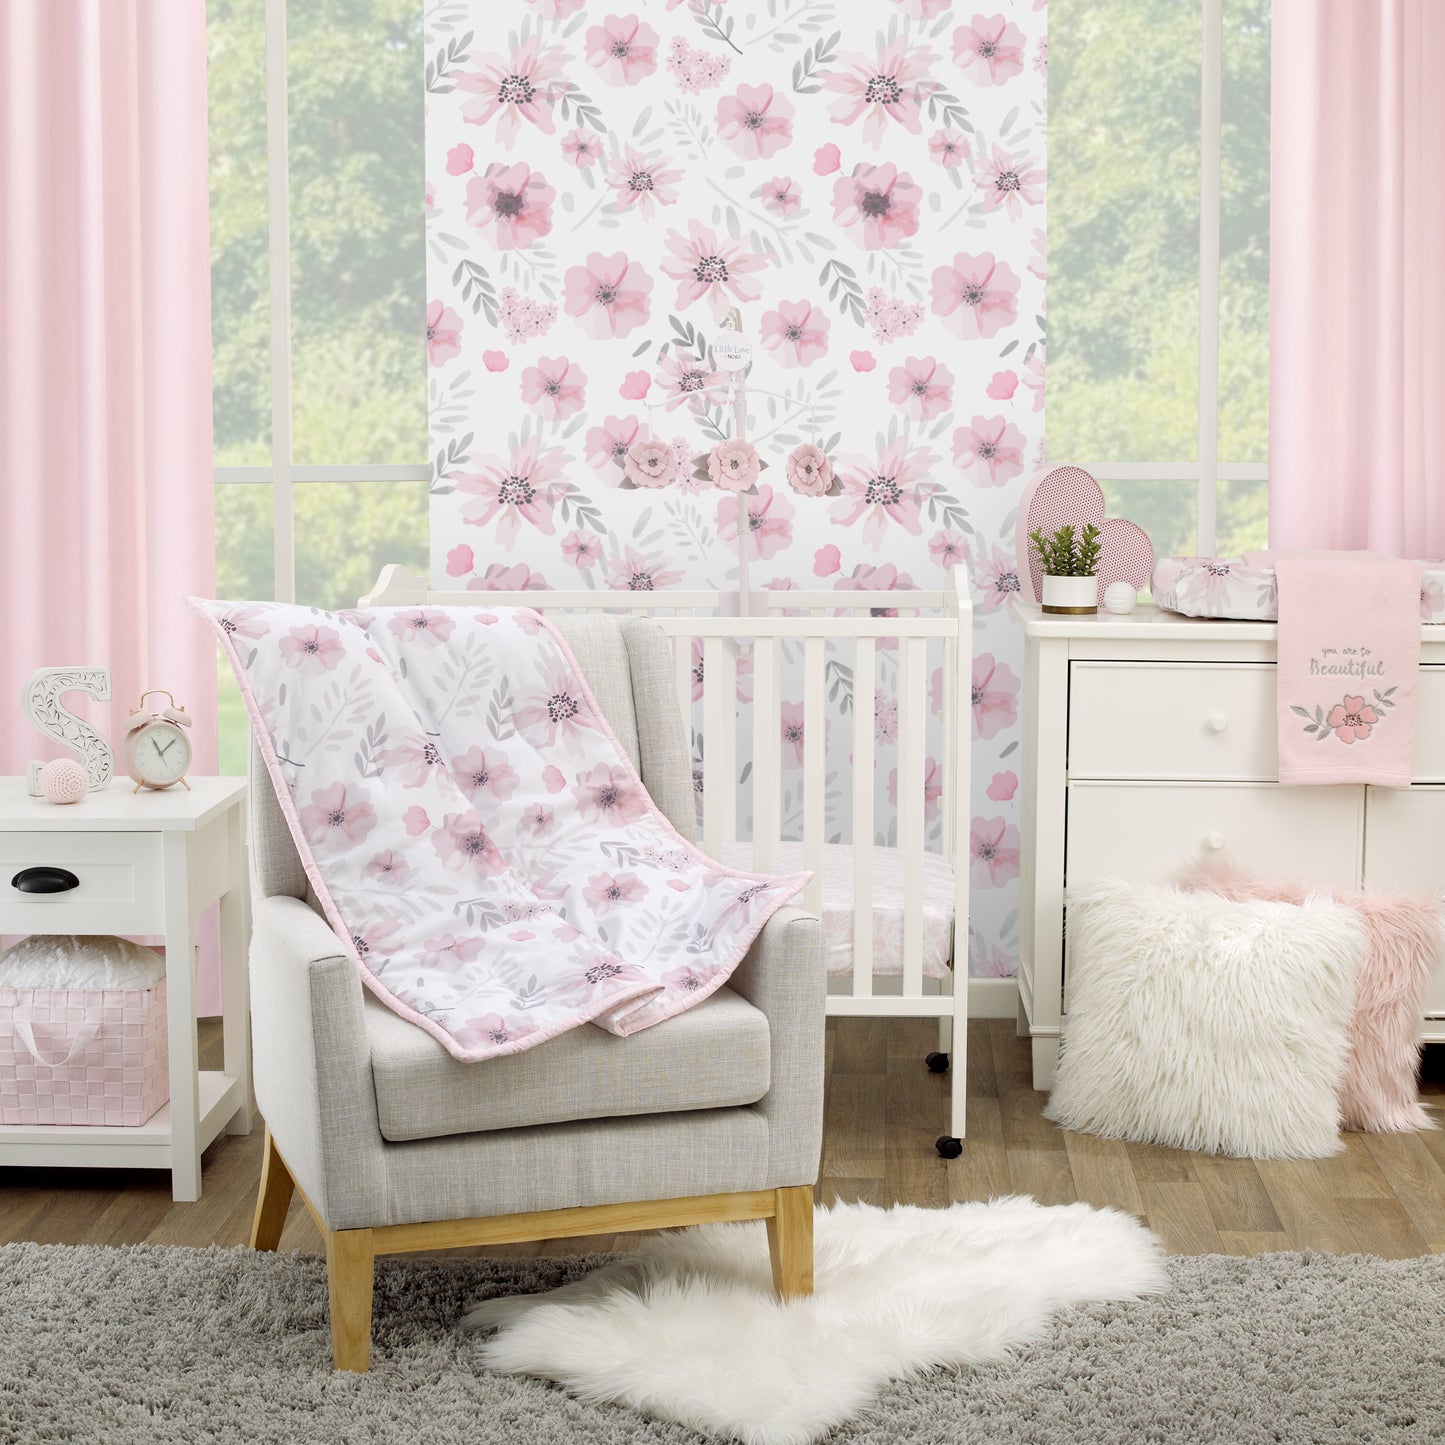 Little Love by NoJo Beautiful Blooms Pink, White, and Grey Floral 3 Piece Nursery Mini Crib Bedding Set - Comforter and Two Fitted Mini Crib Sheets